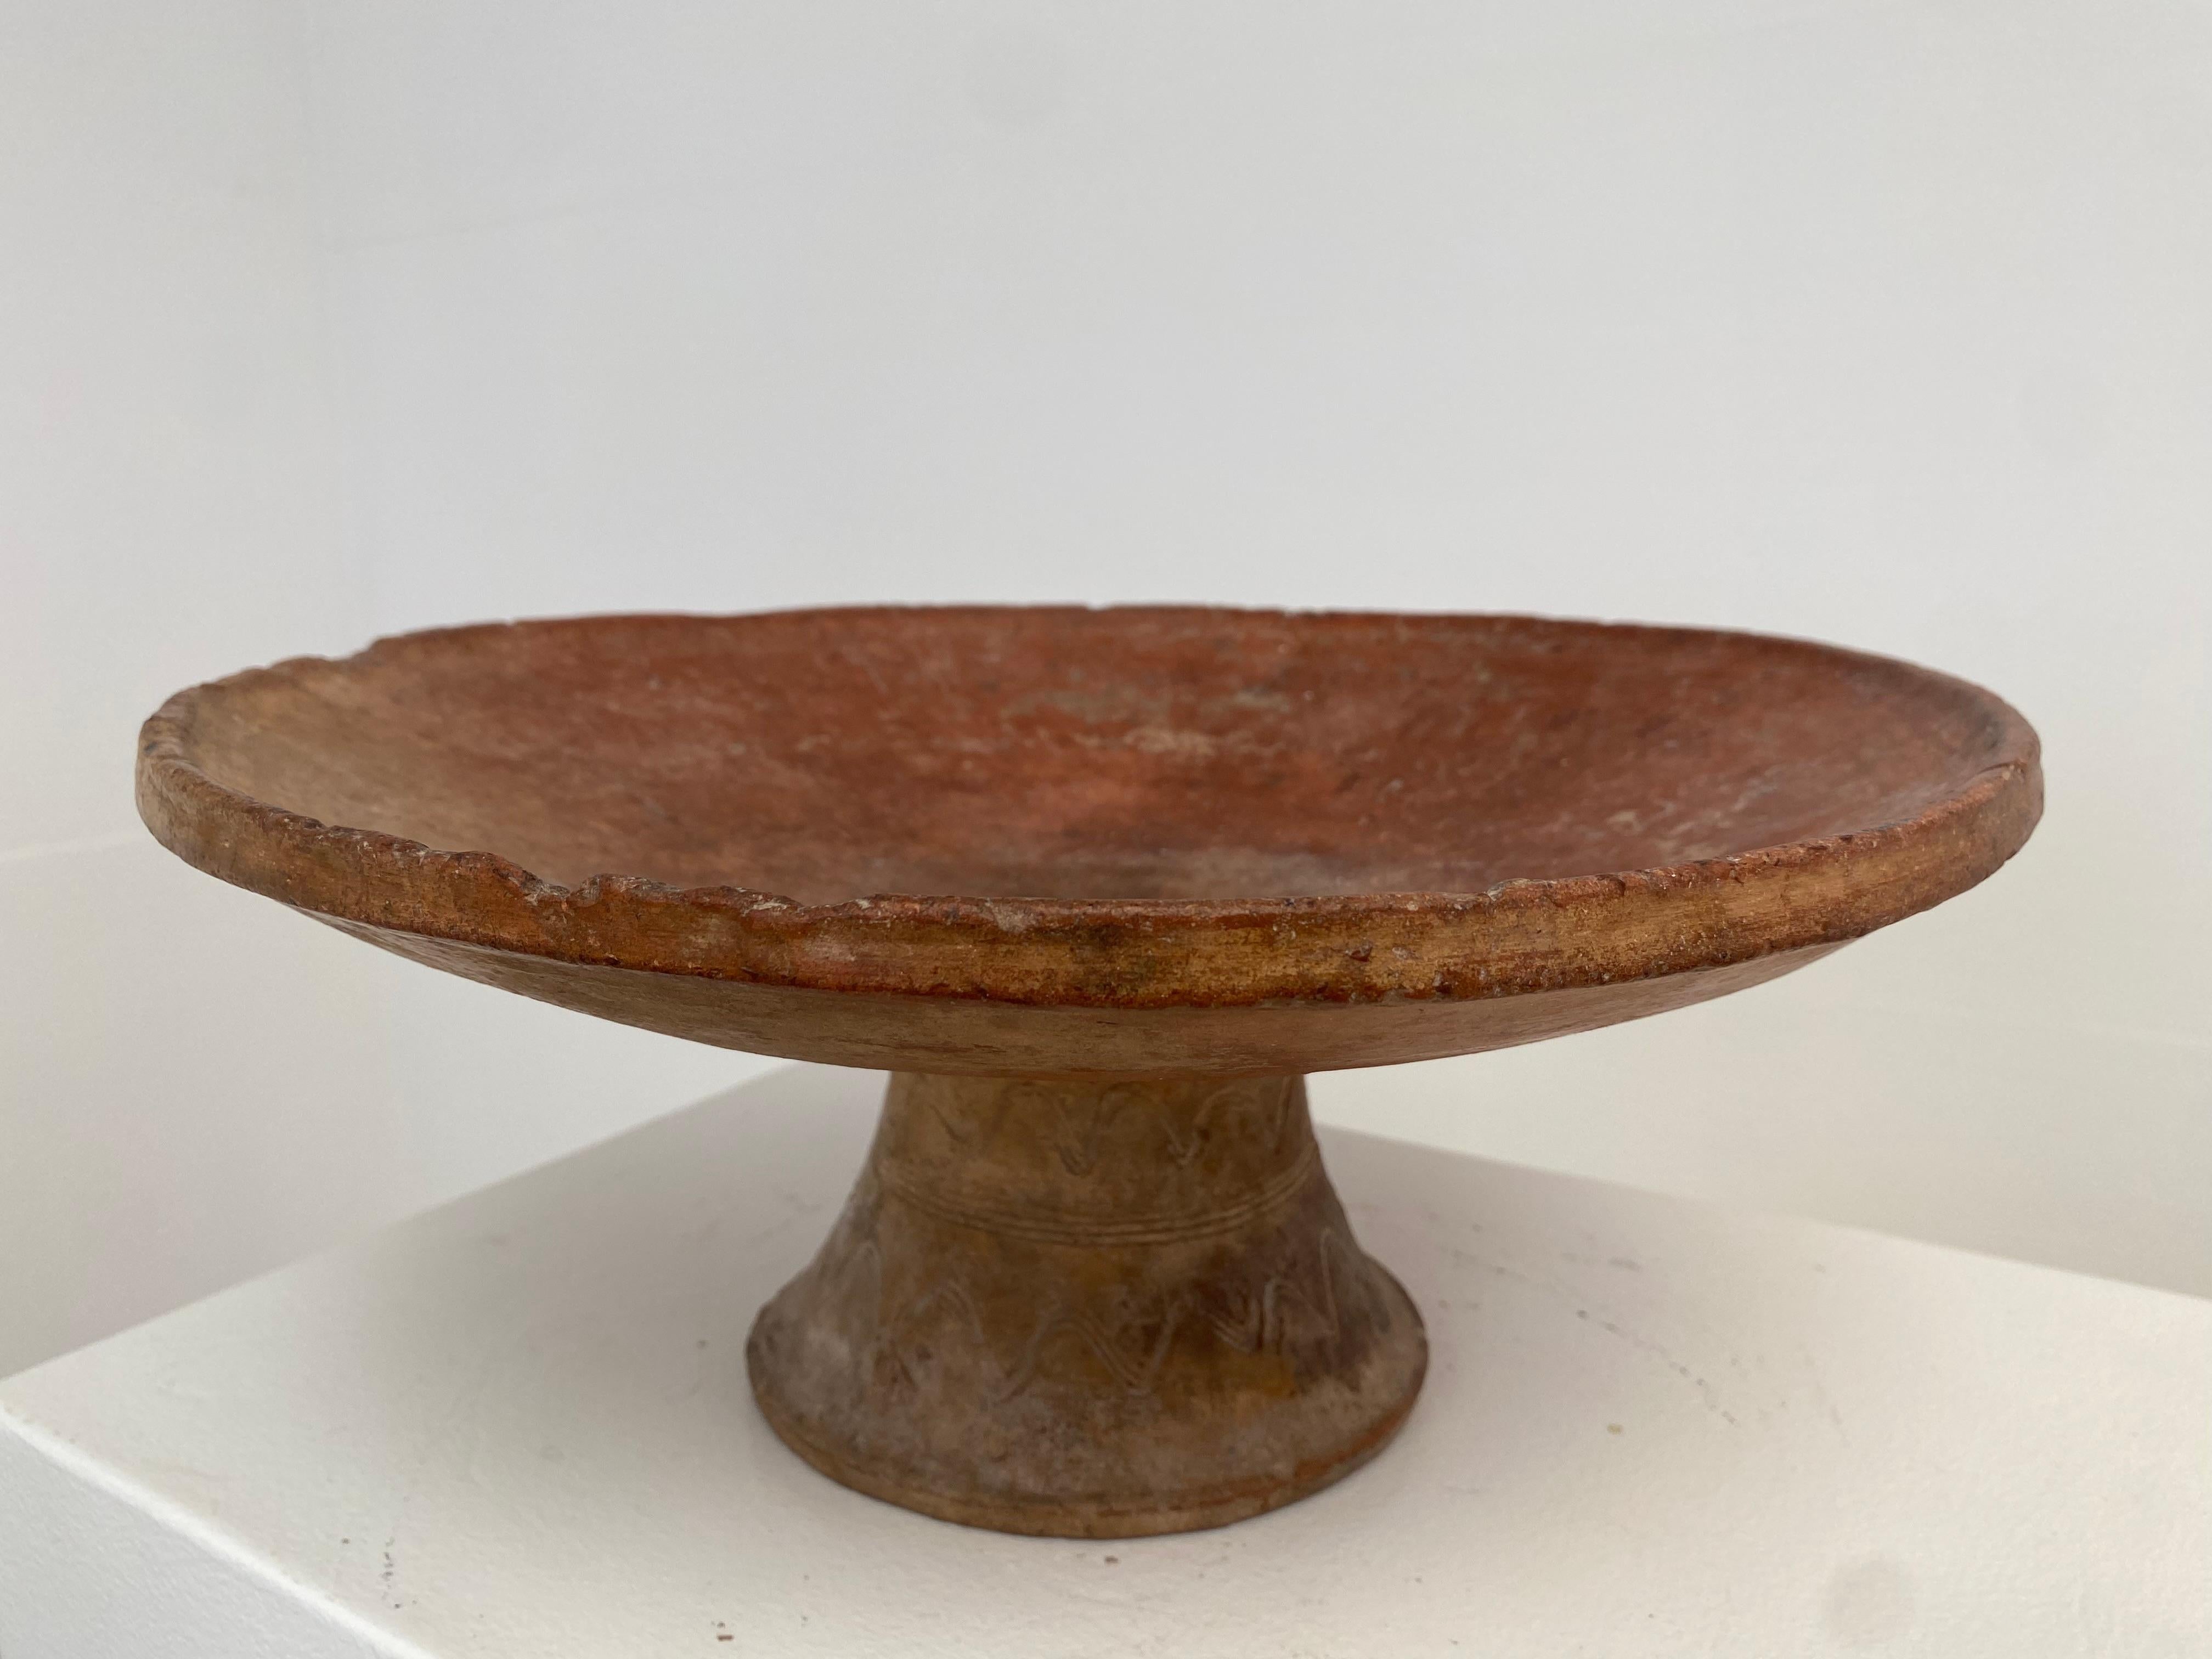 Antique Berber Terracotta Bowl on a central foot For Sale 4